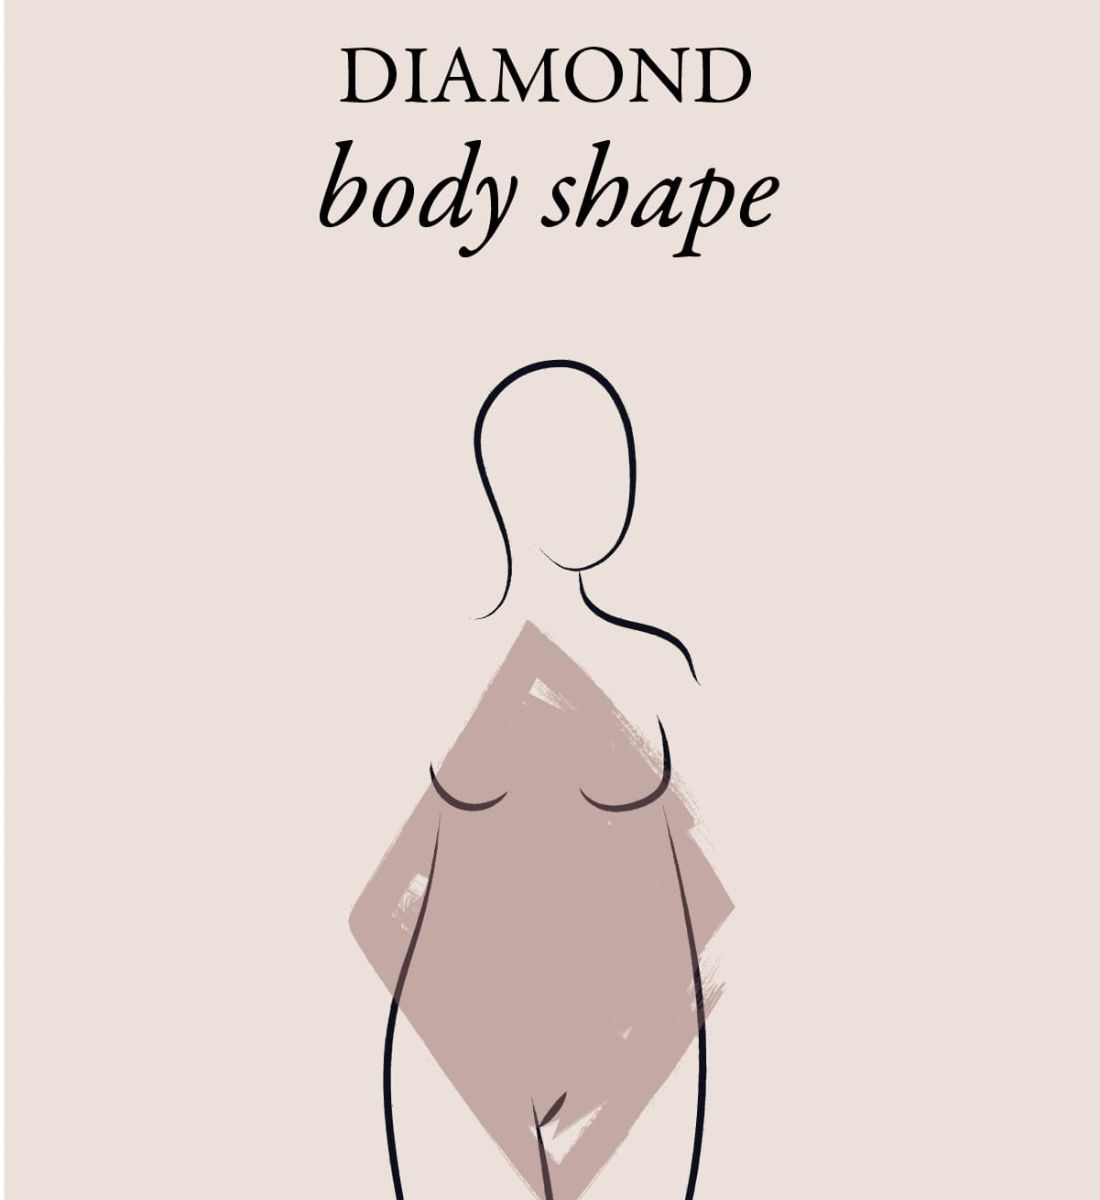 What is a diamond body type?